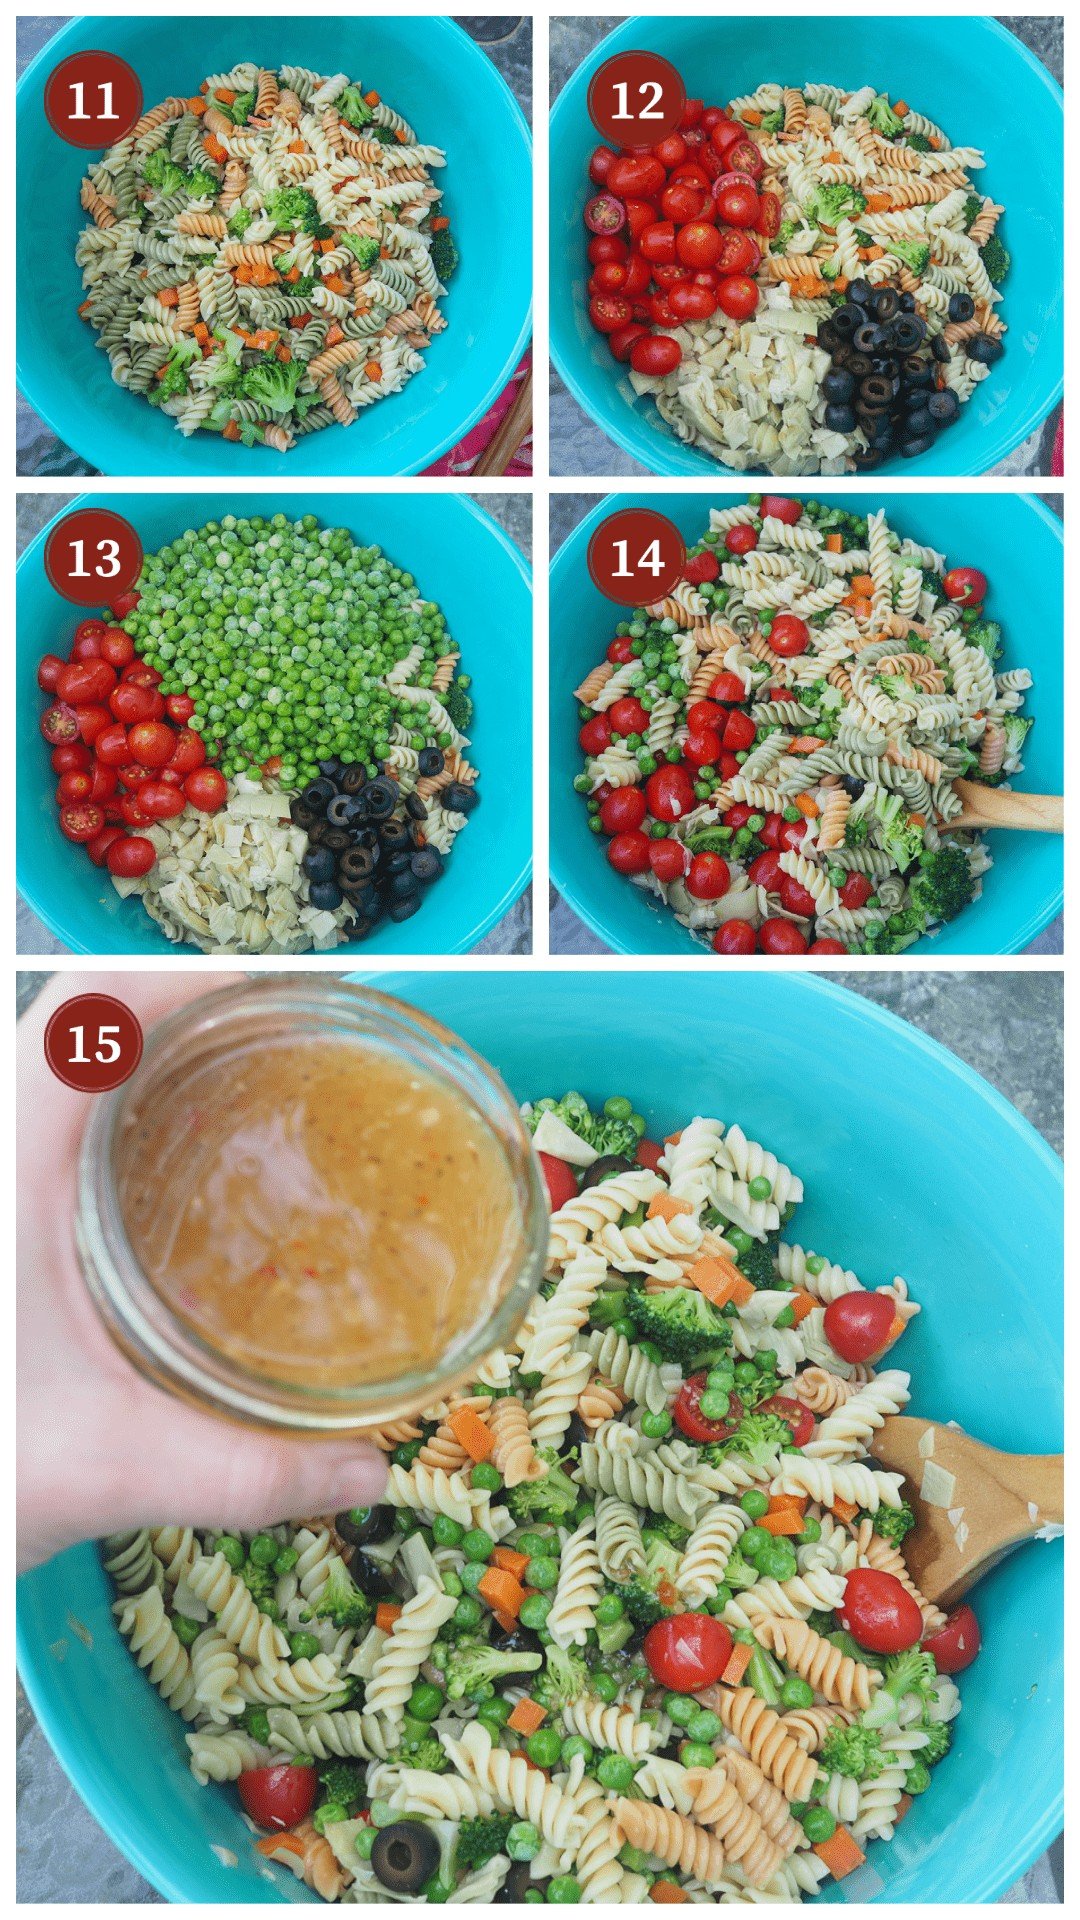 A collage of images showing hot to make pasta salad, steps 11 - 15.